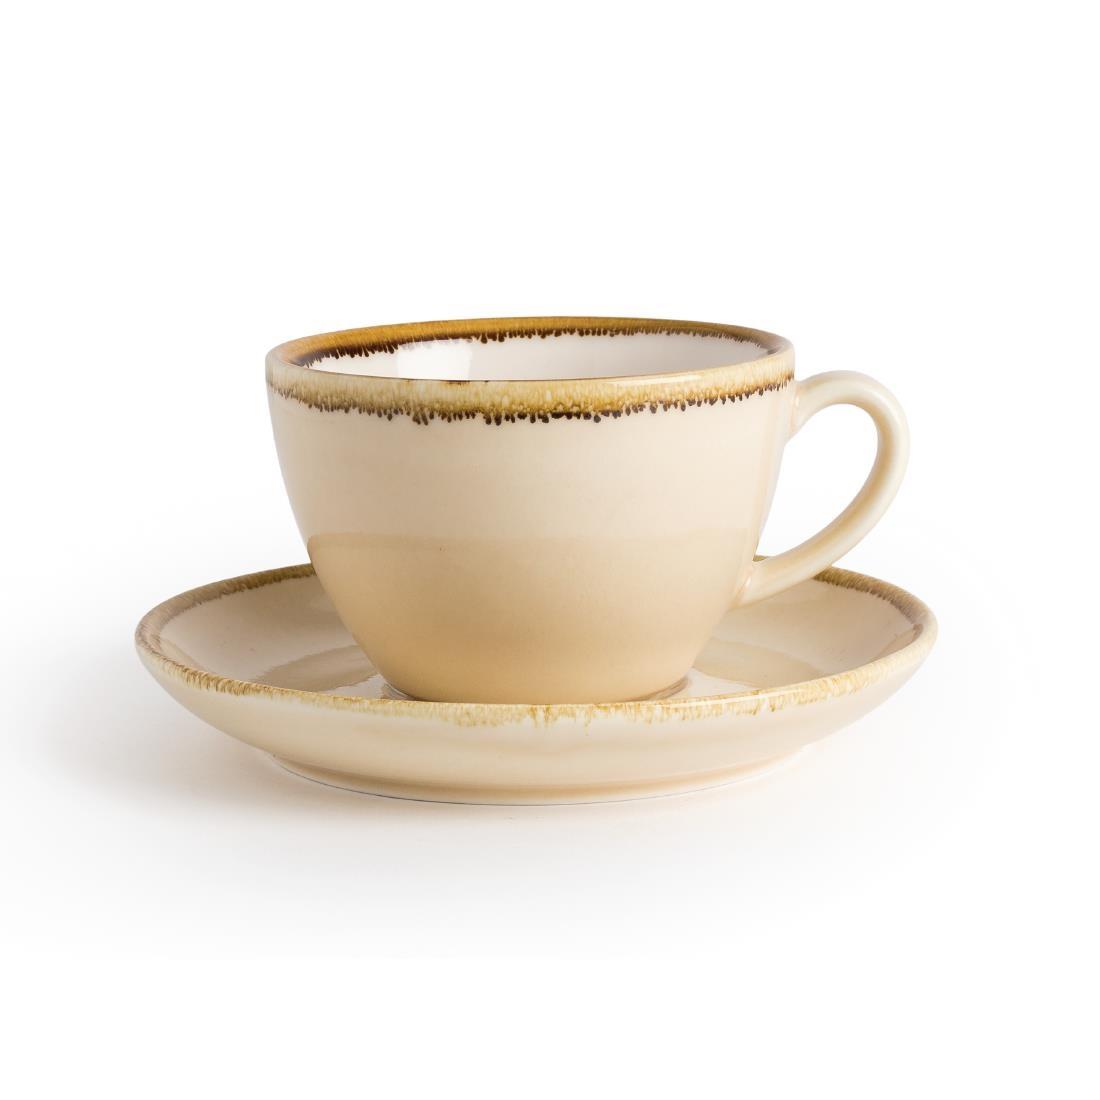 Olympia Kiln Cappuccino Saucer Sandstone 160mm (Pack of 6) - GP333  - 3